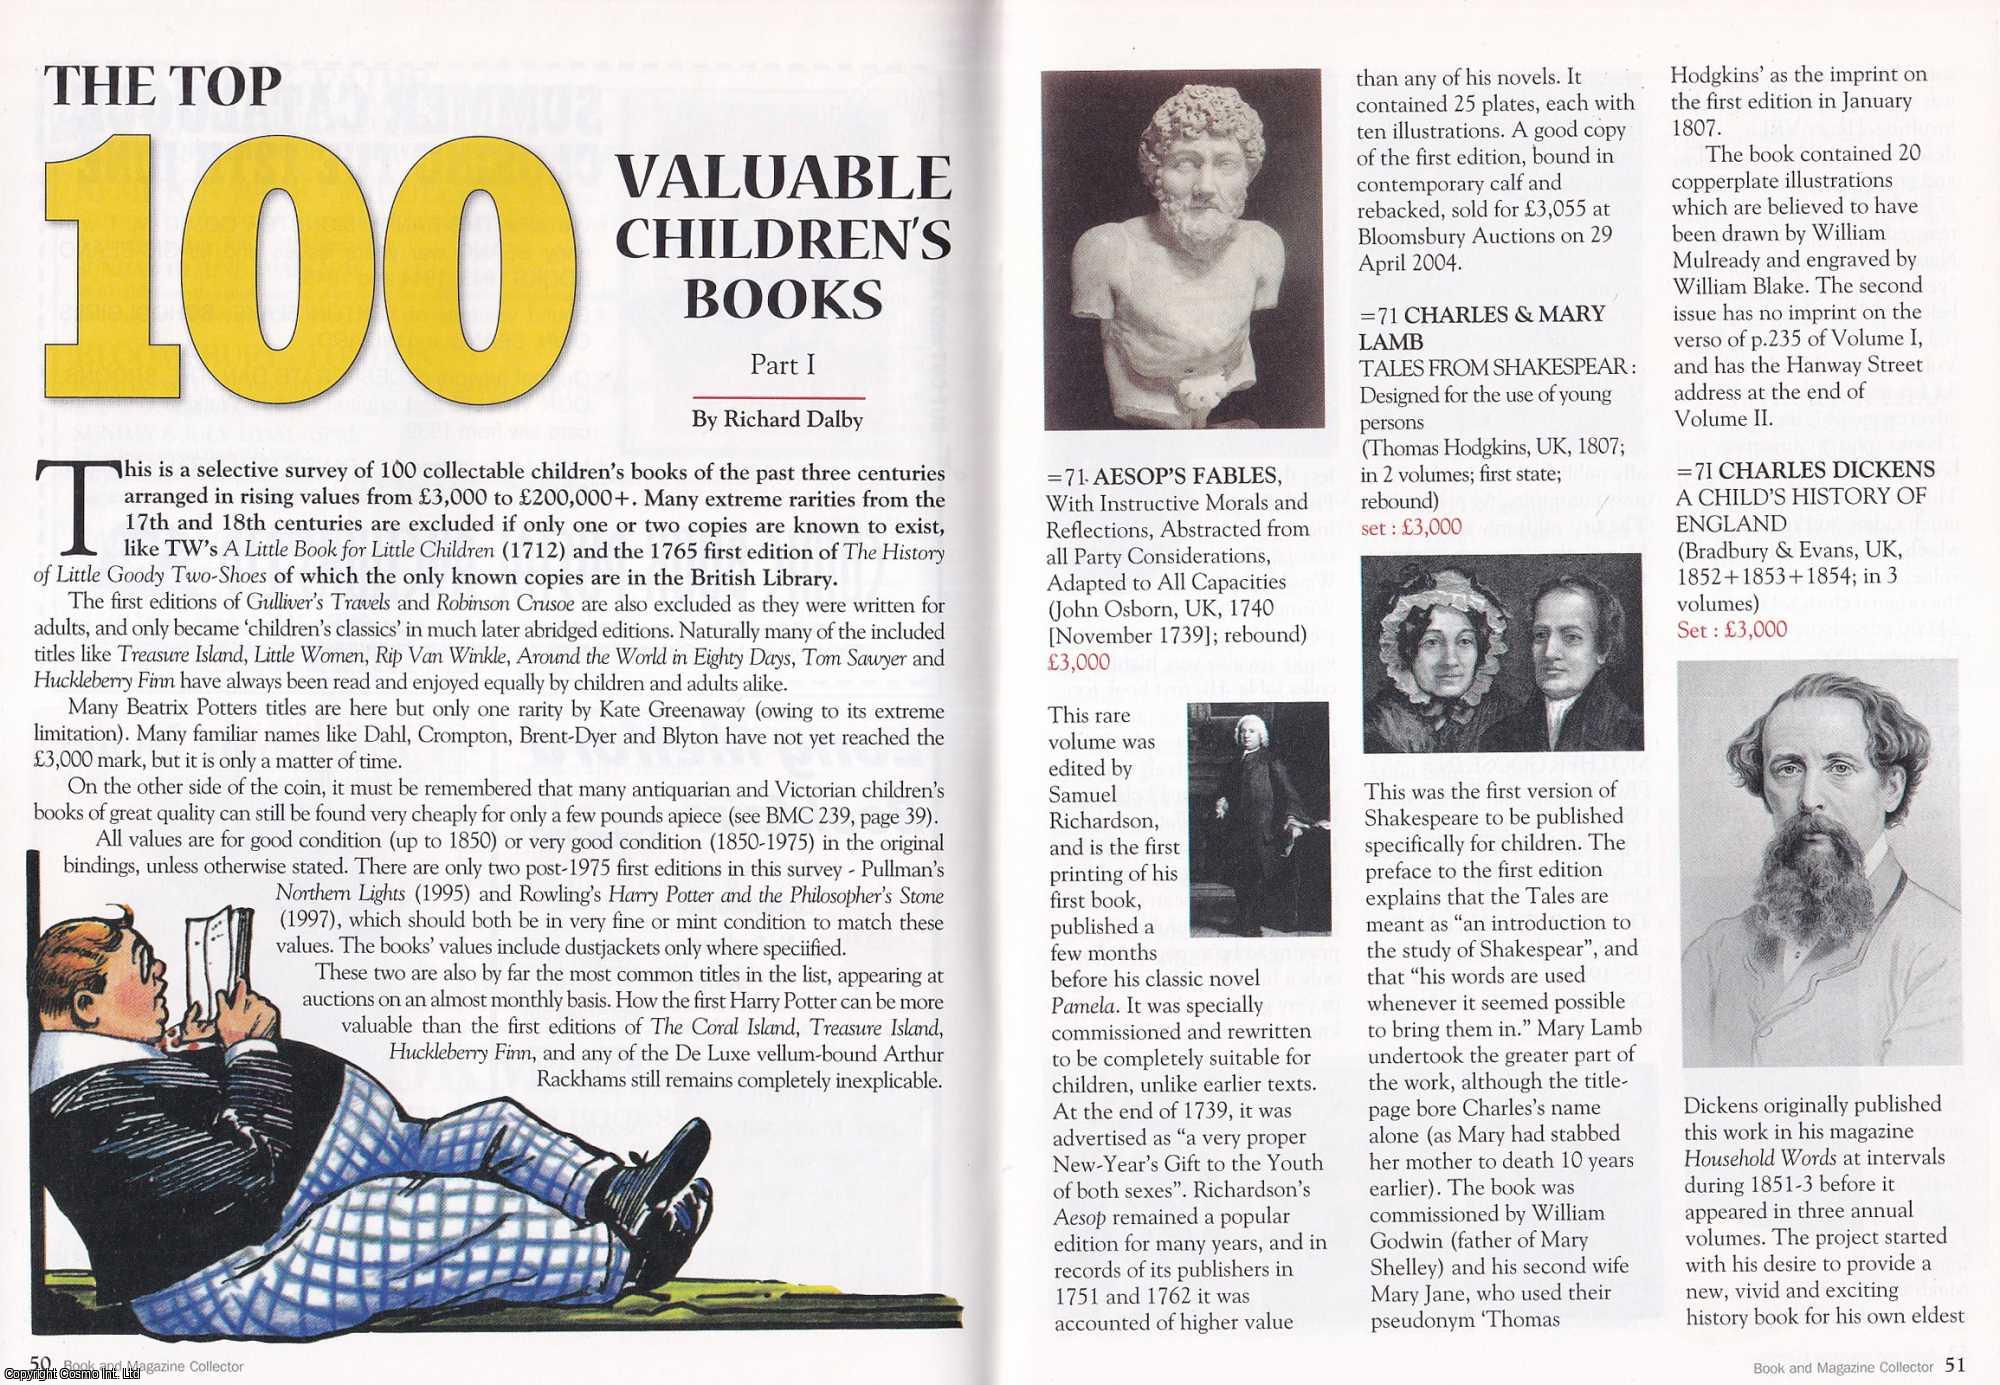 Richard Dalby - The Top 100 (part 1) Valuable Children's Books. This is an original article separated from an issue of The Book & Magazine Collector publication.